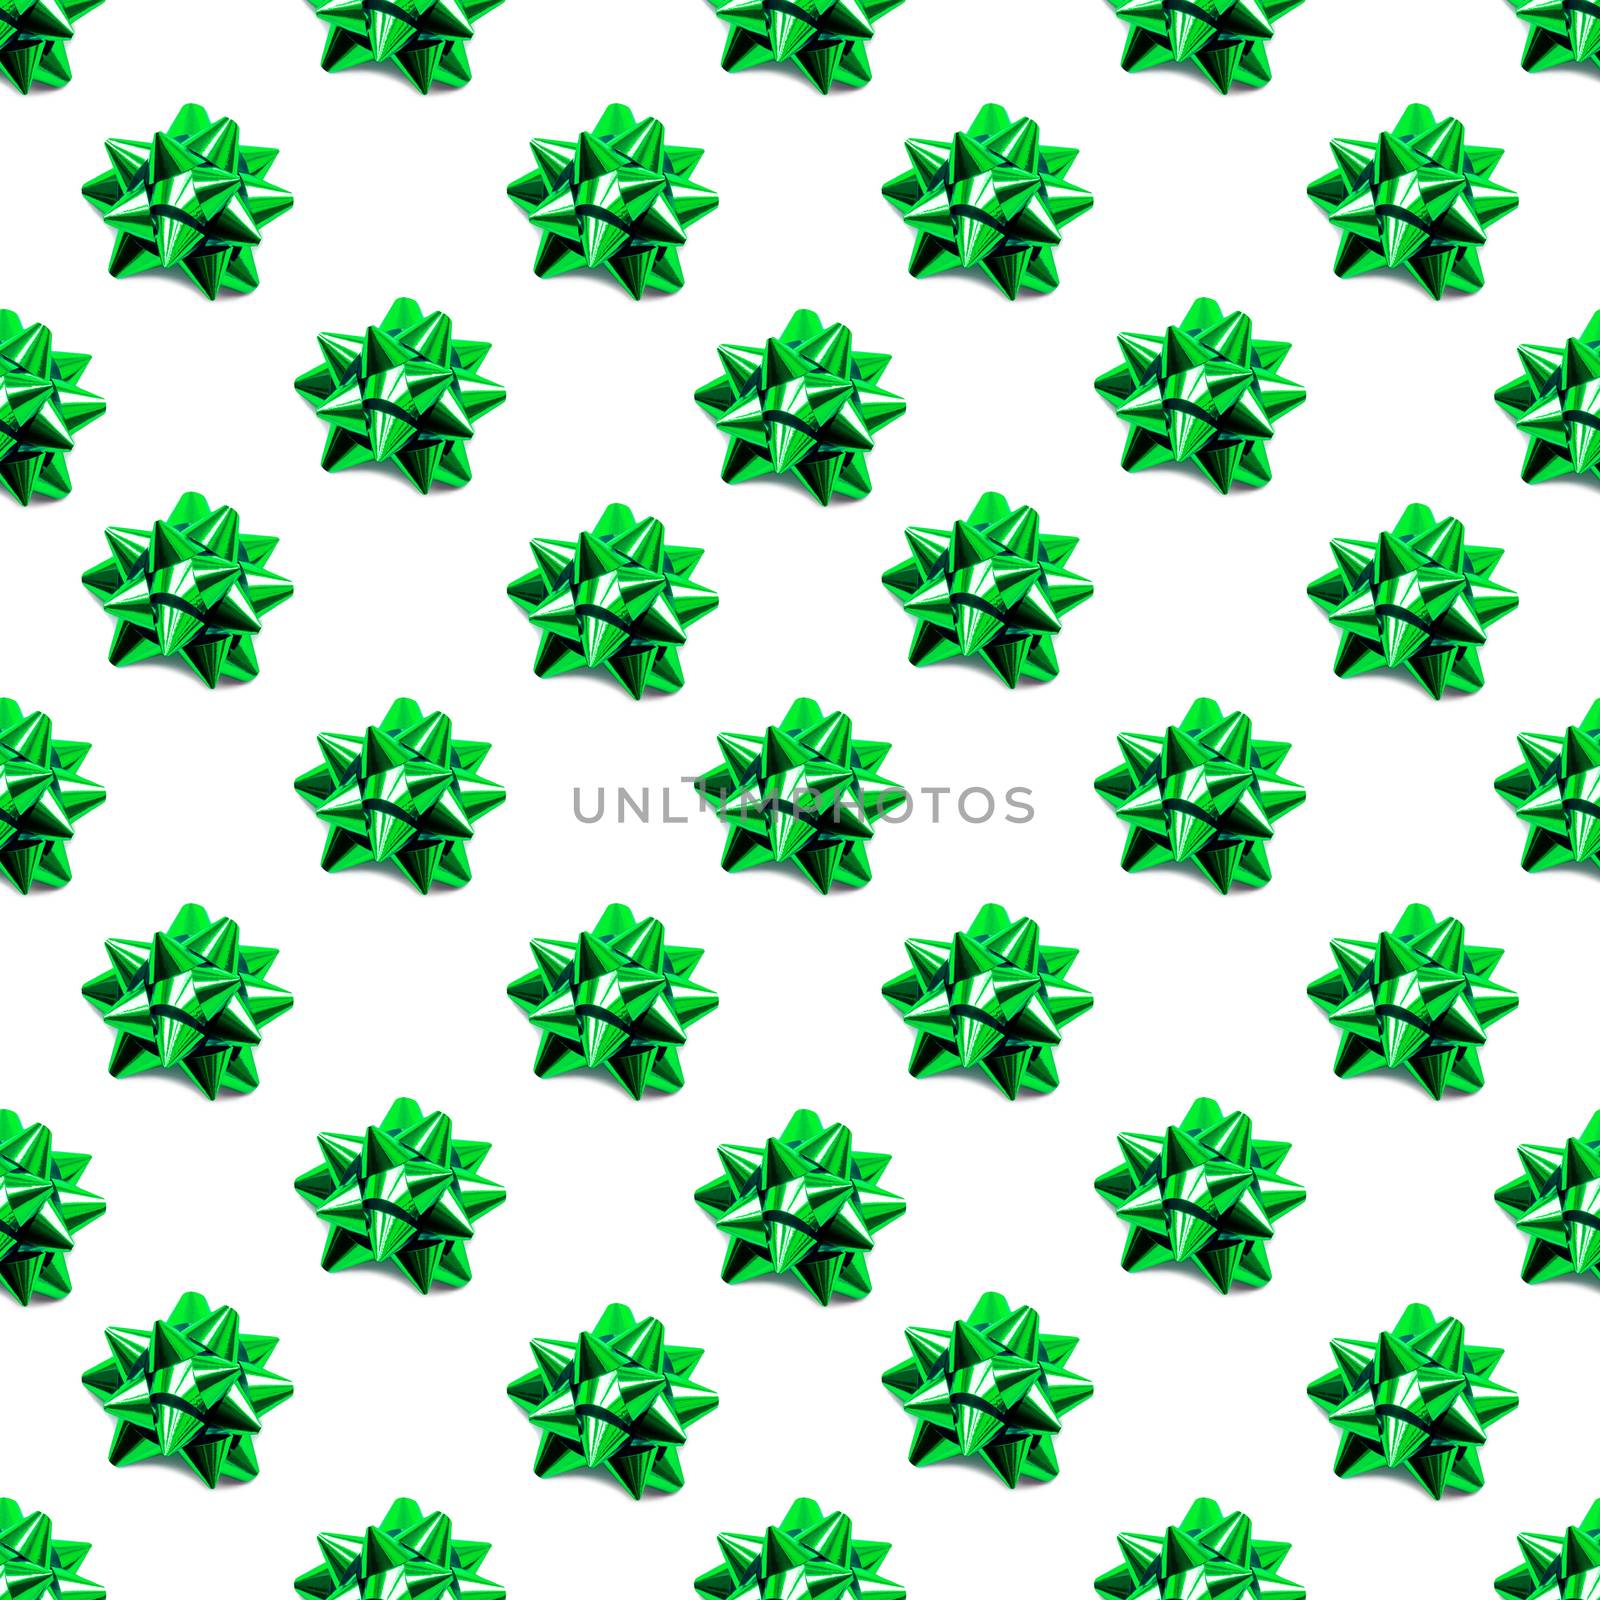 Seamless pattern with sparkling green bow. Holidaybackground with decorative bows.